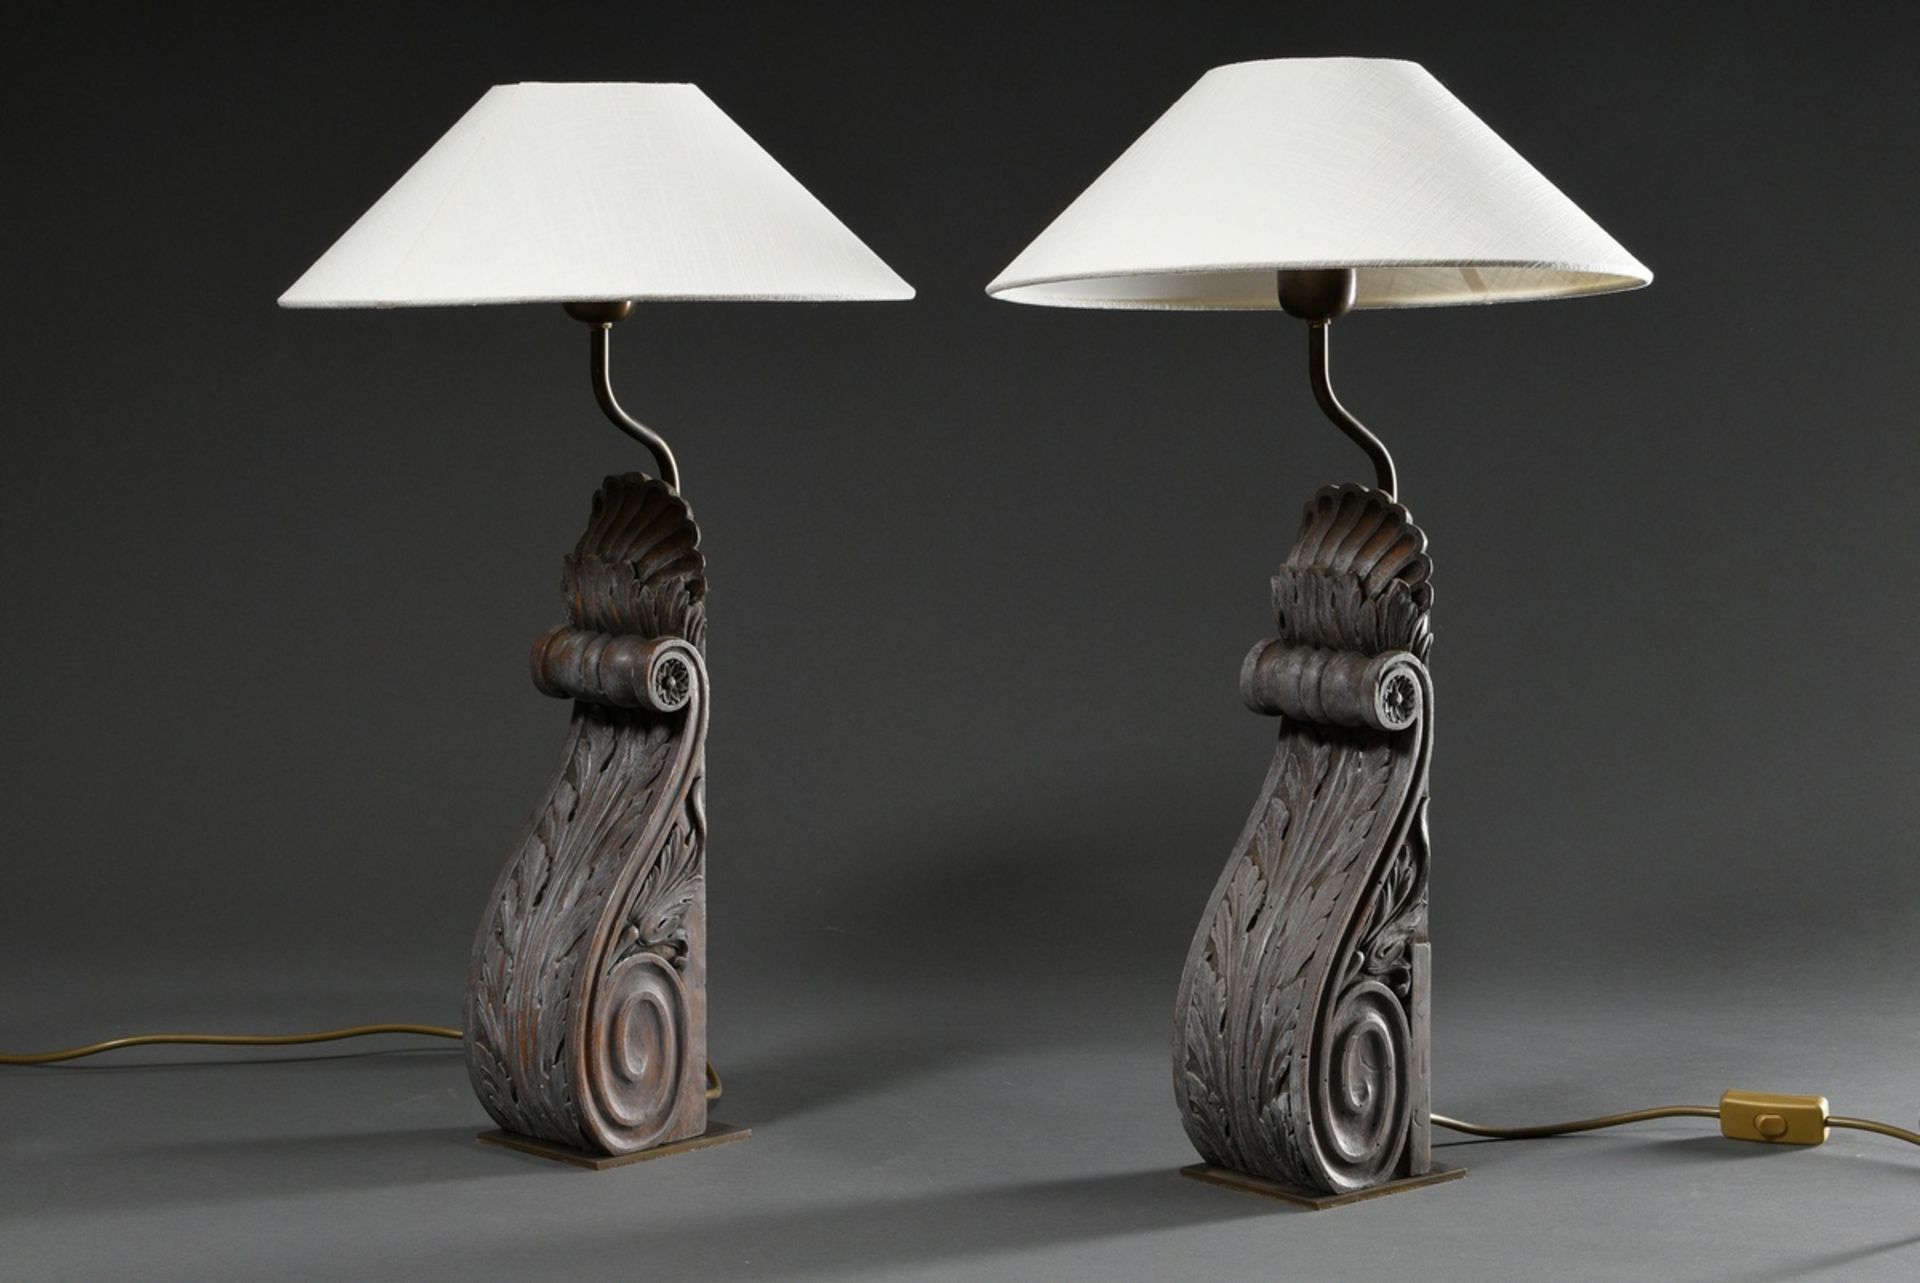 Pair of table lamps in volute form with acanthus leaves, wood carved and grey painted, 20th c., h. 